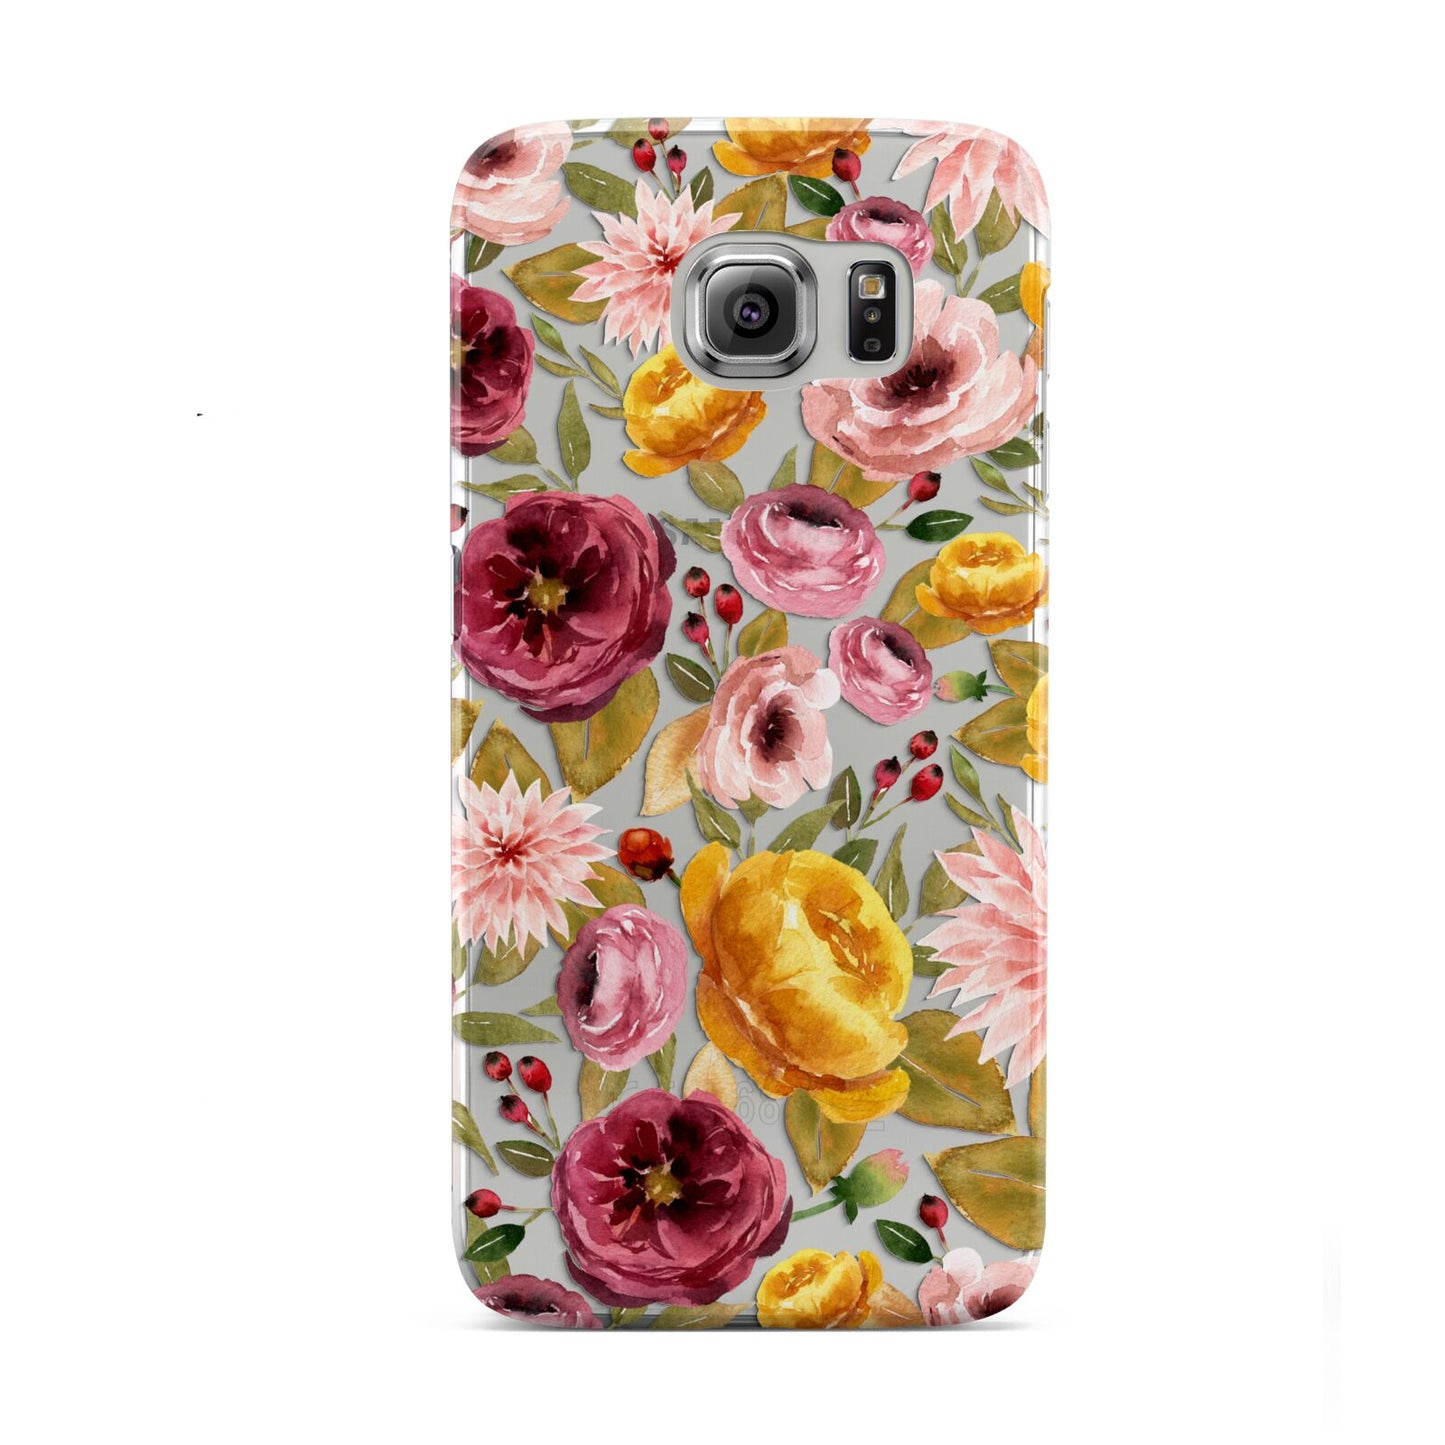 Pink and Mustard Floral Samsung Galaxy S6 Case